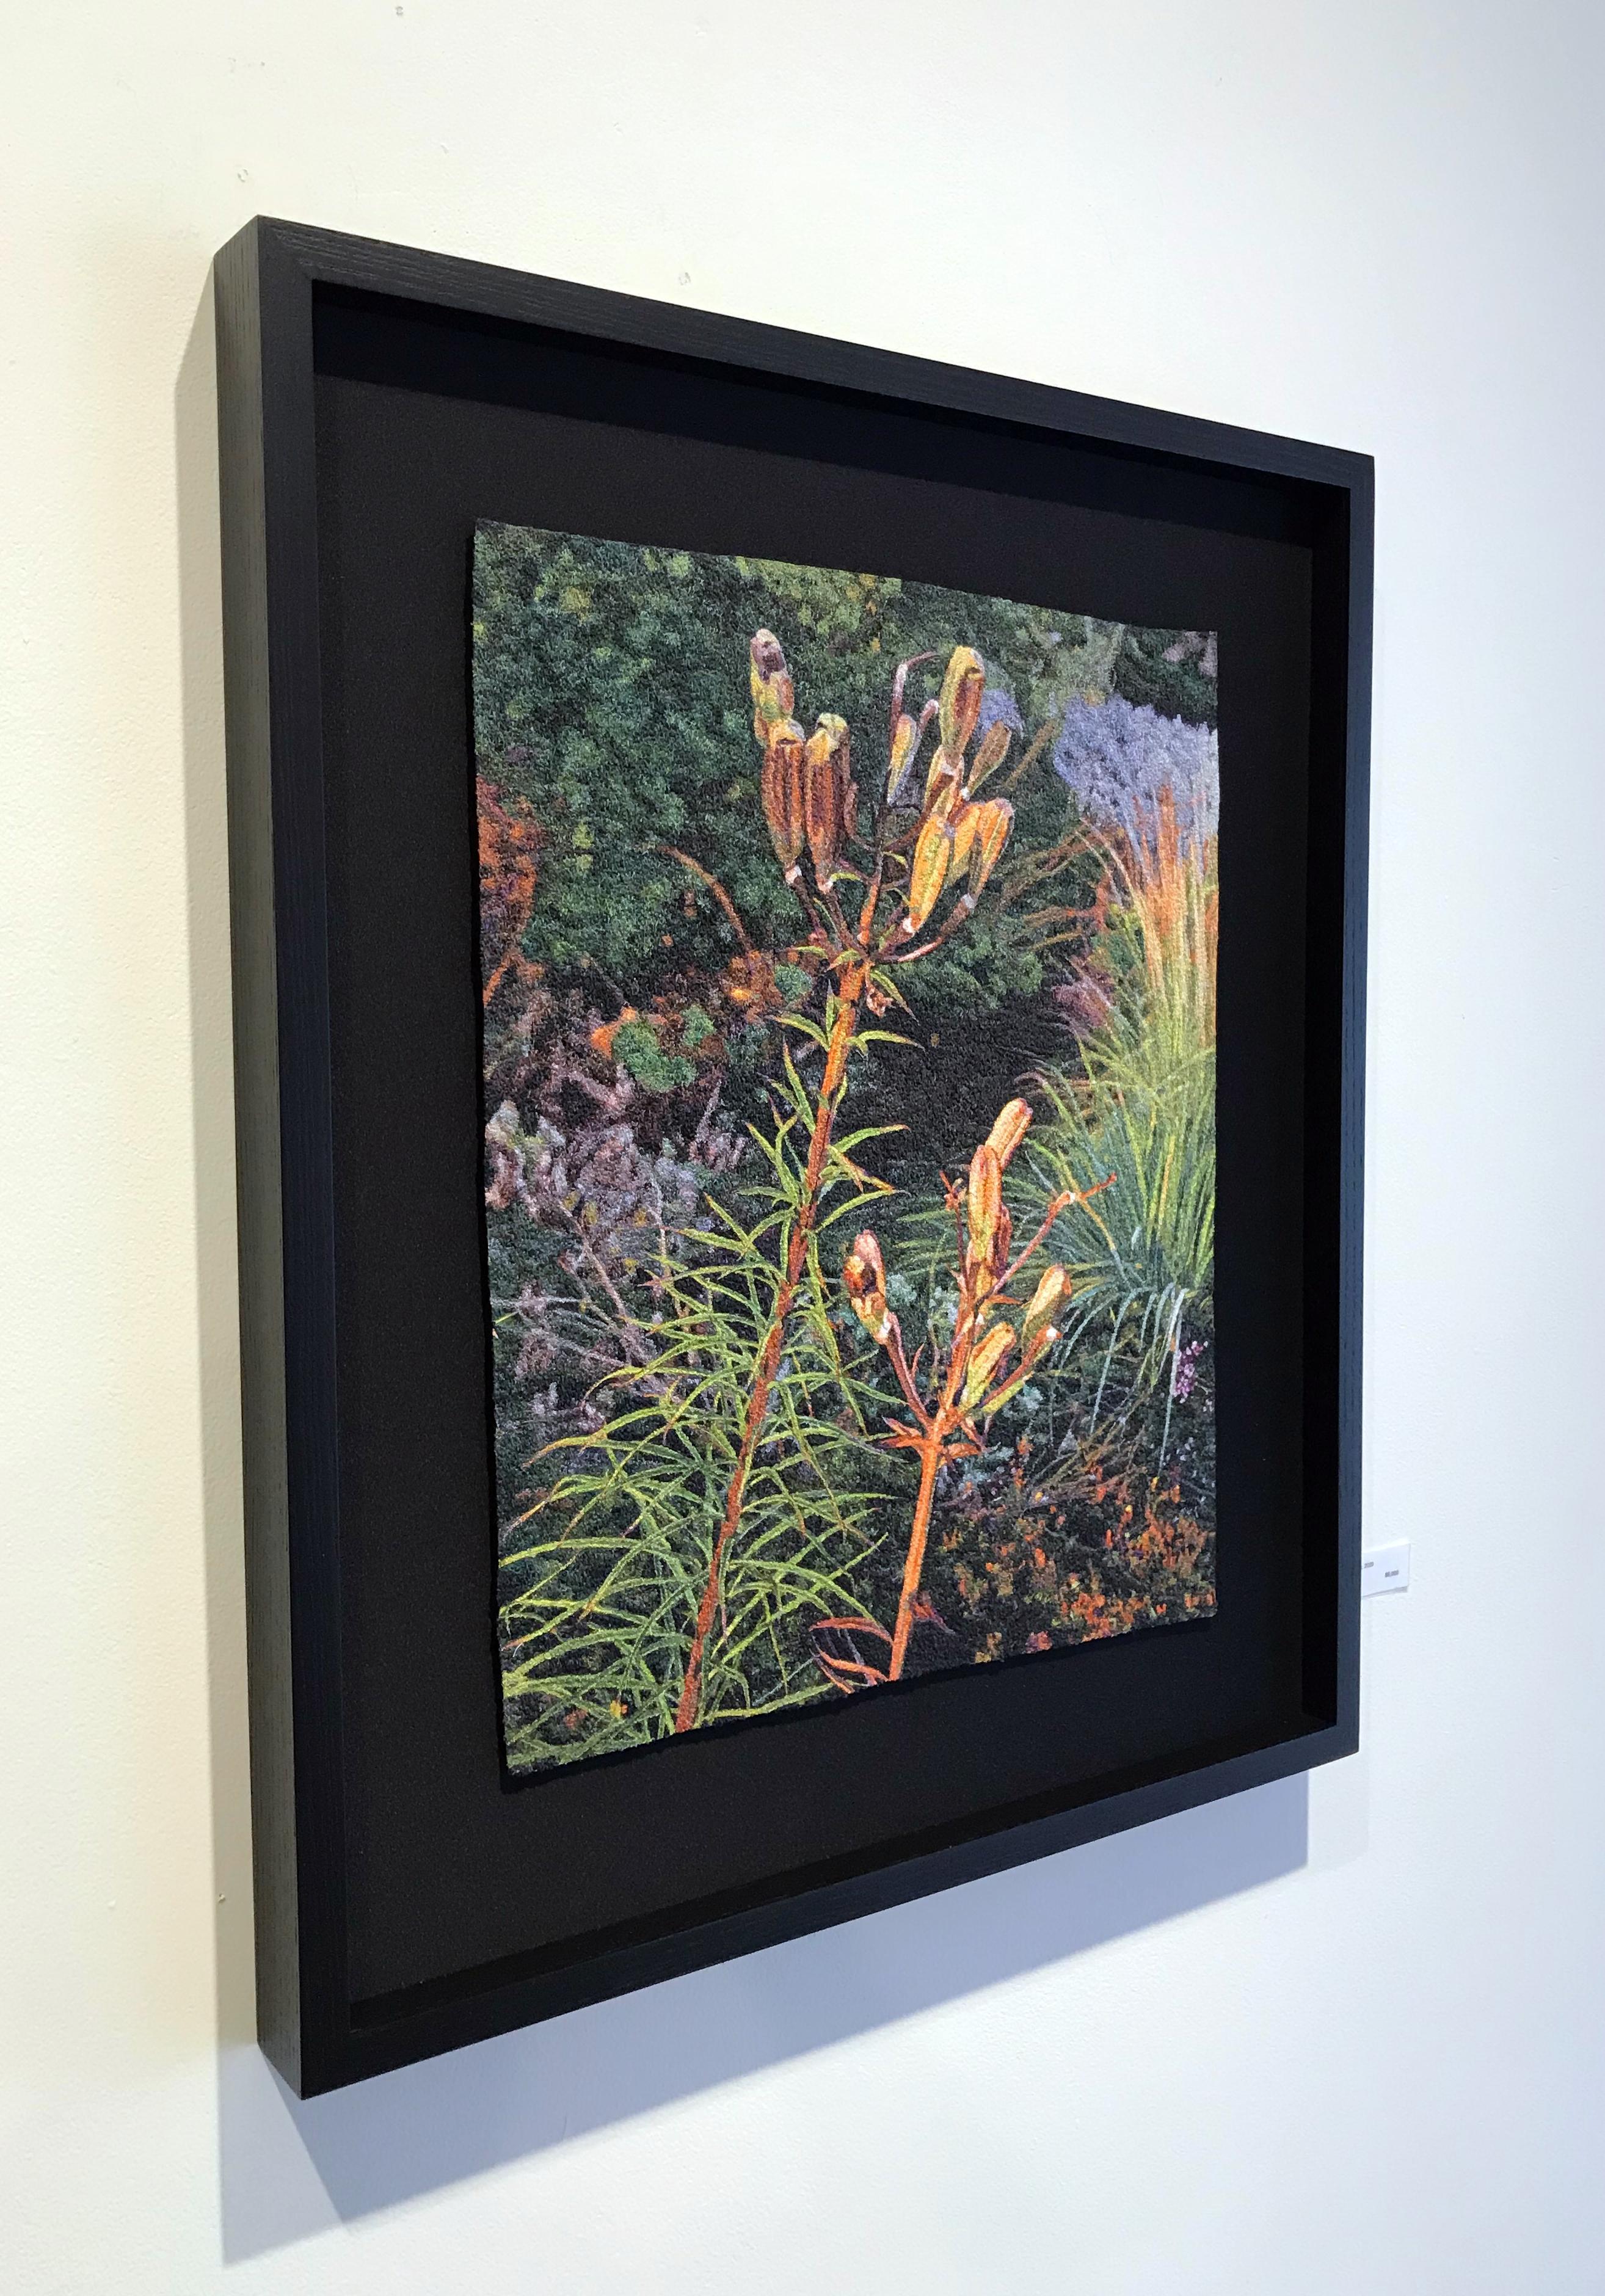 Carol Shinn is a studio artist who lives in Fort Collins, Colorado. She is known internationally for photo-based machine-stitched images. She has taught many classes and workshops across the United States, and her pieces are in numerous public and